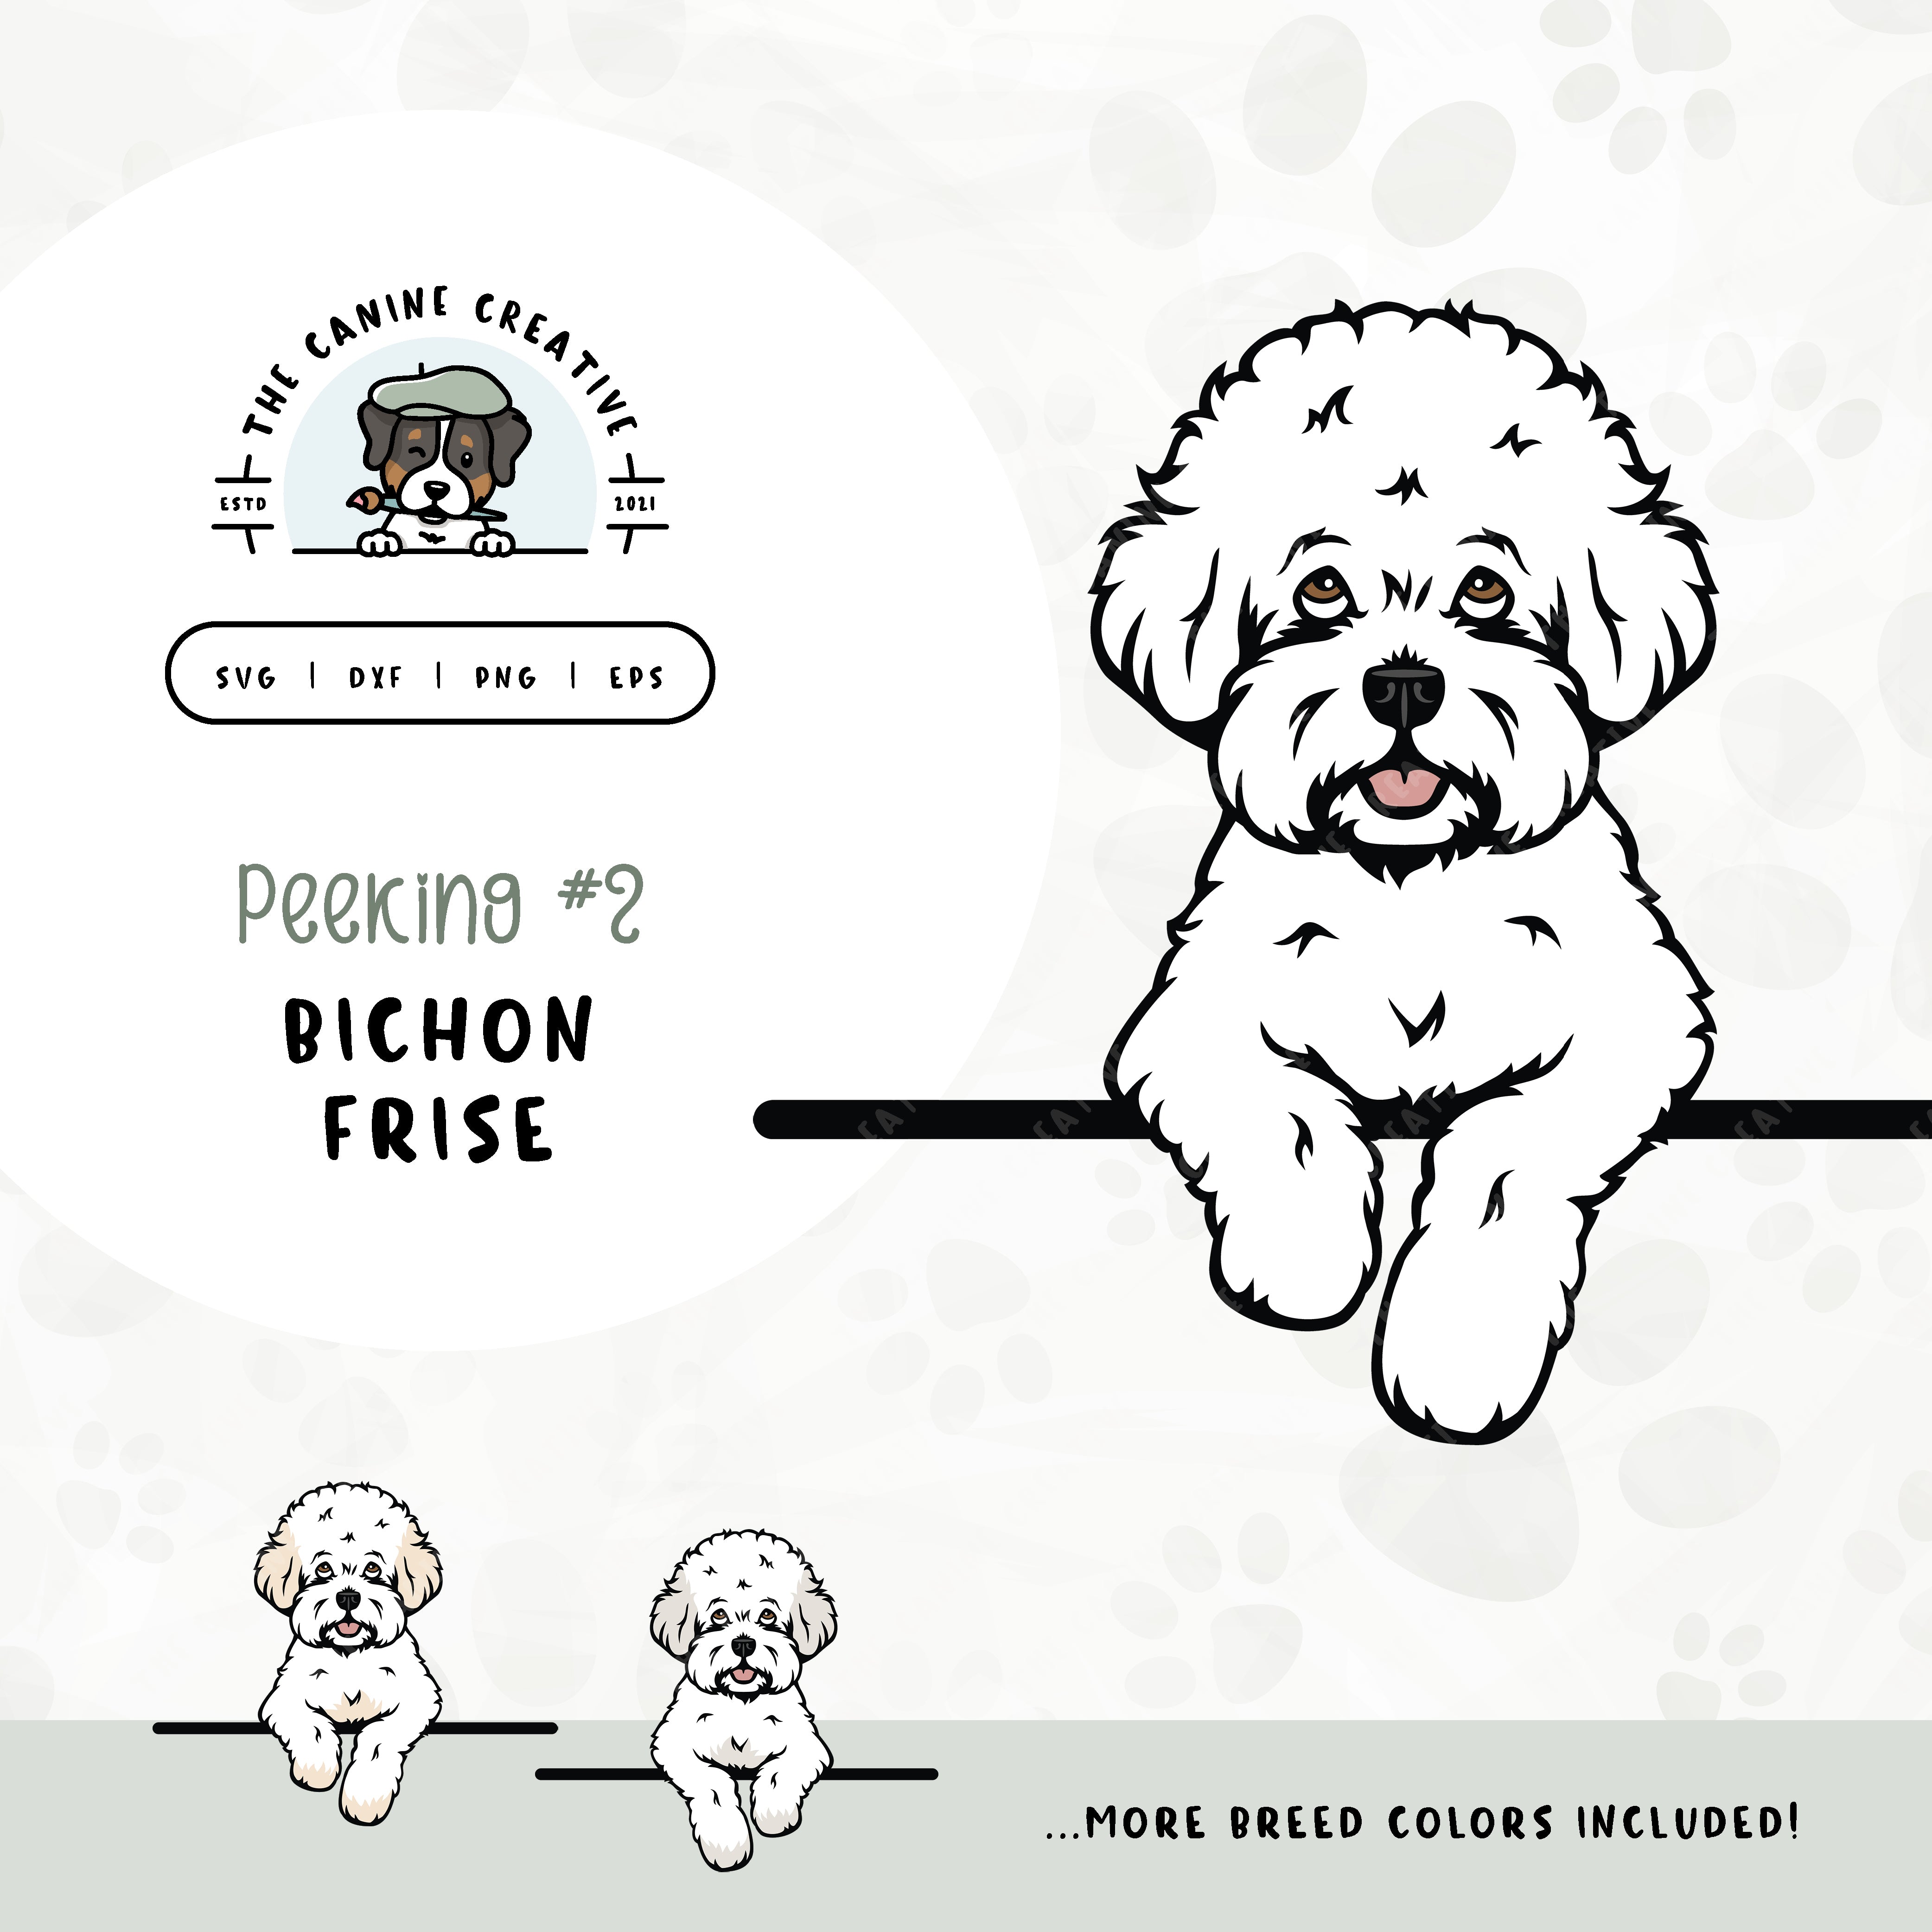 This illustrated design features a peeking Bichon Frise. File formats include: SVG, DXF, PNG, and EPS.